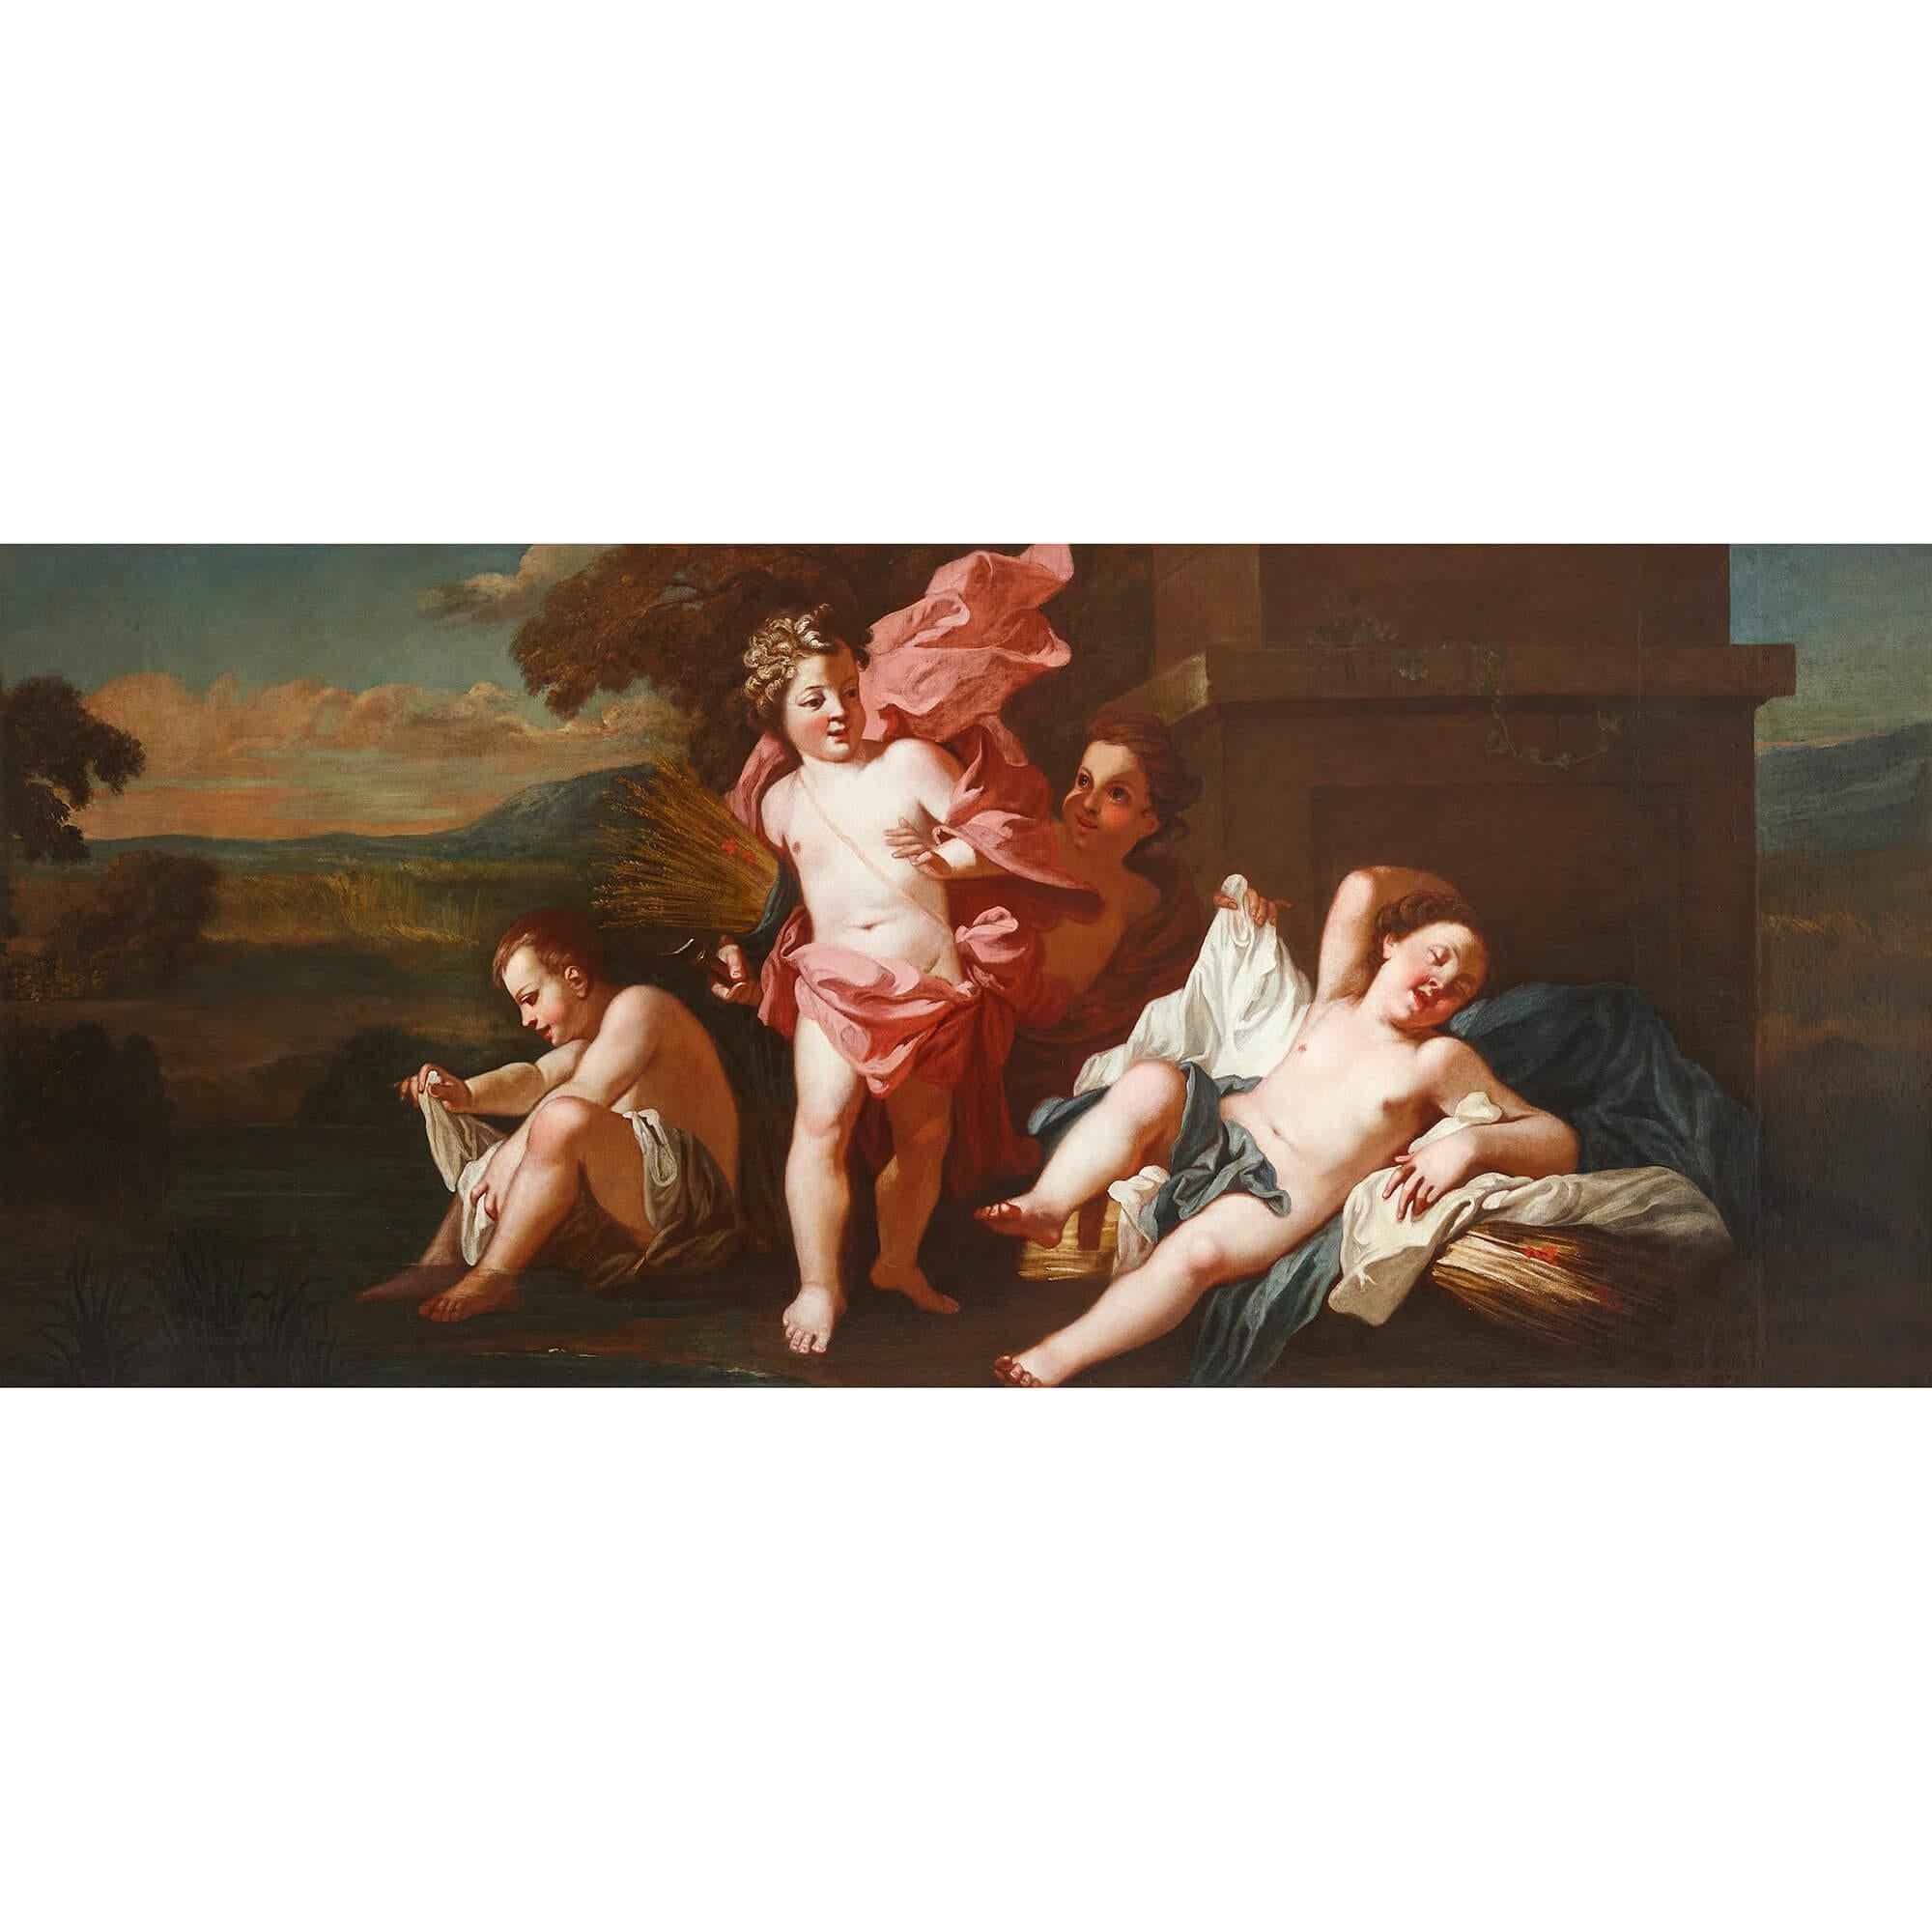 Set of four very large 18th century Italian Rococo paintings of the Four Seasons - Brown Figurative Painting by Unknown